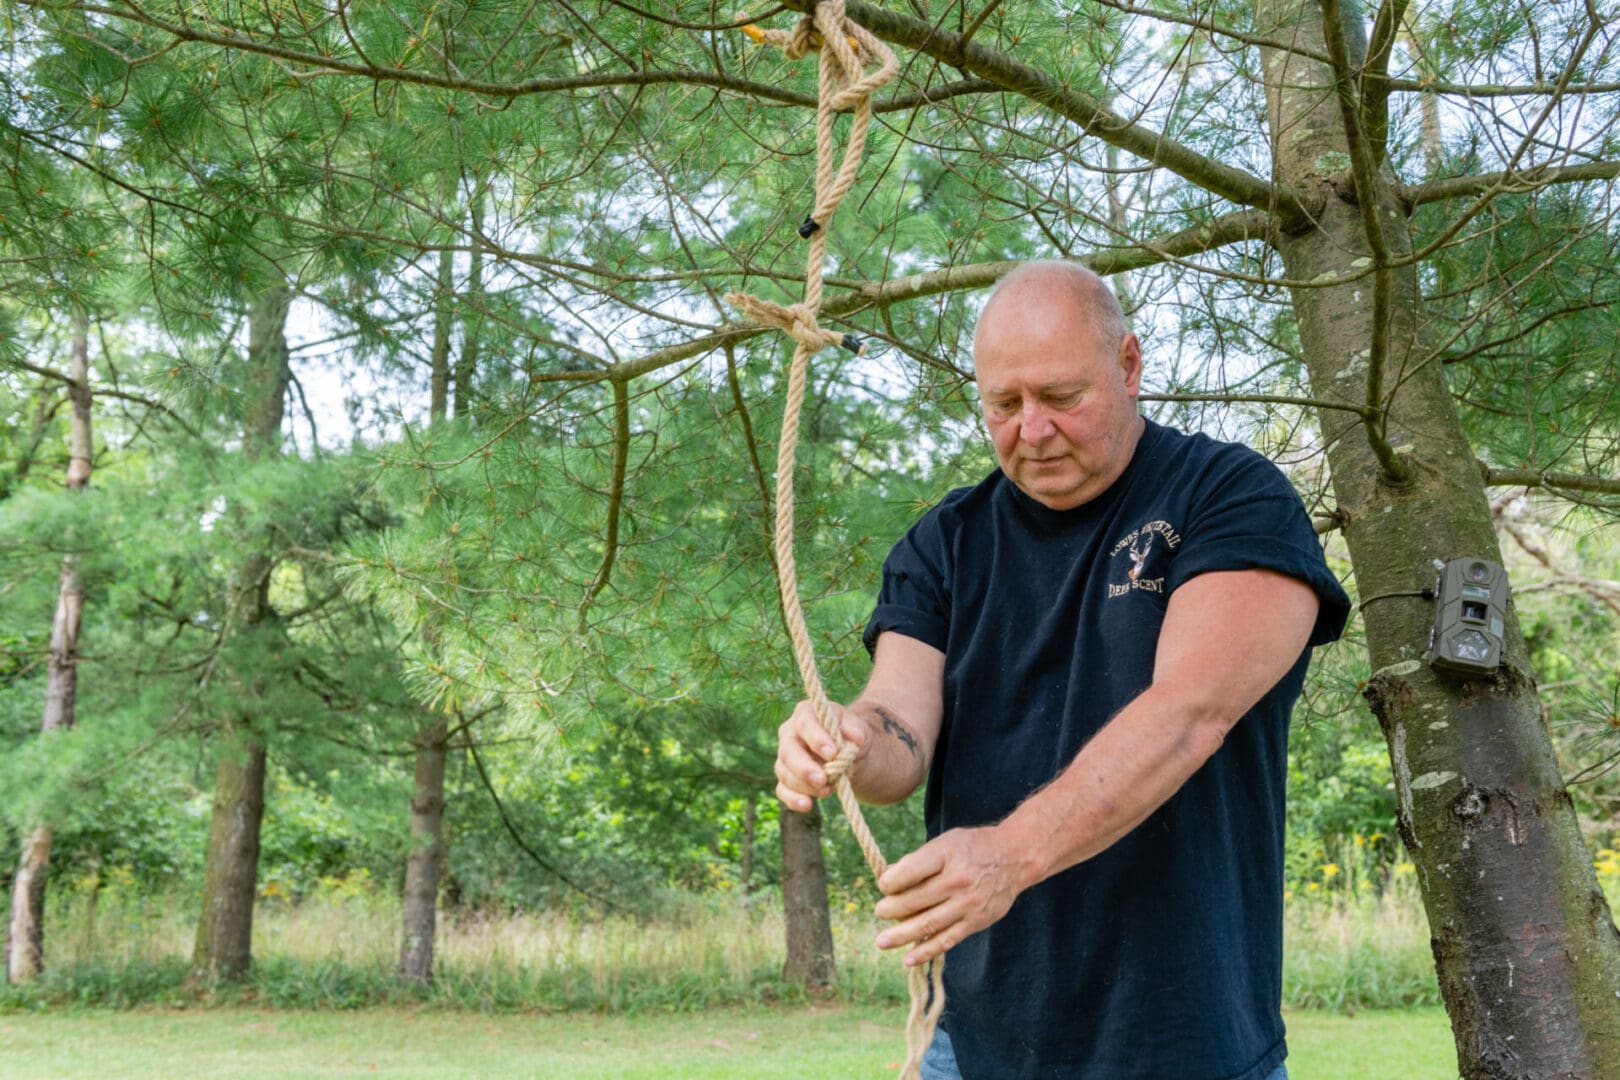 A man holding onto a long stick in the woods